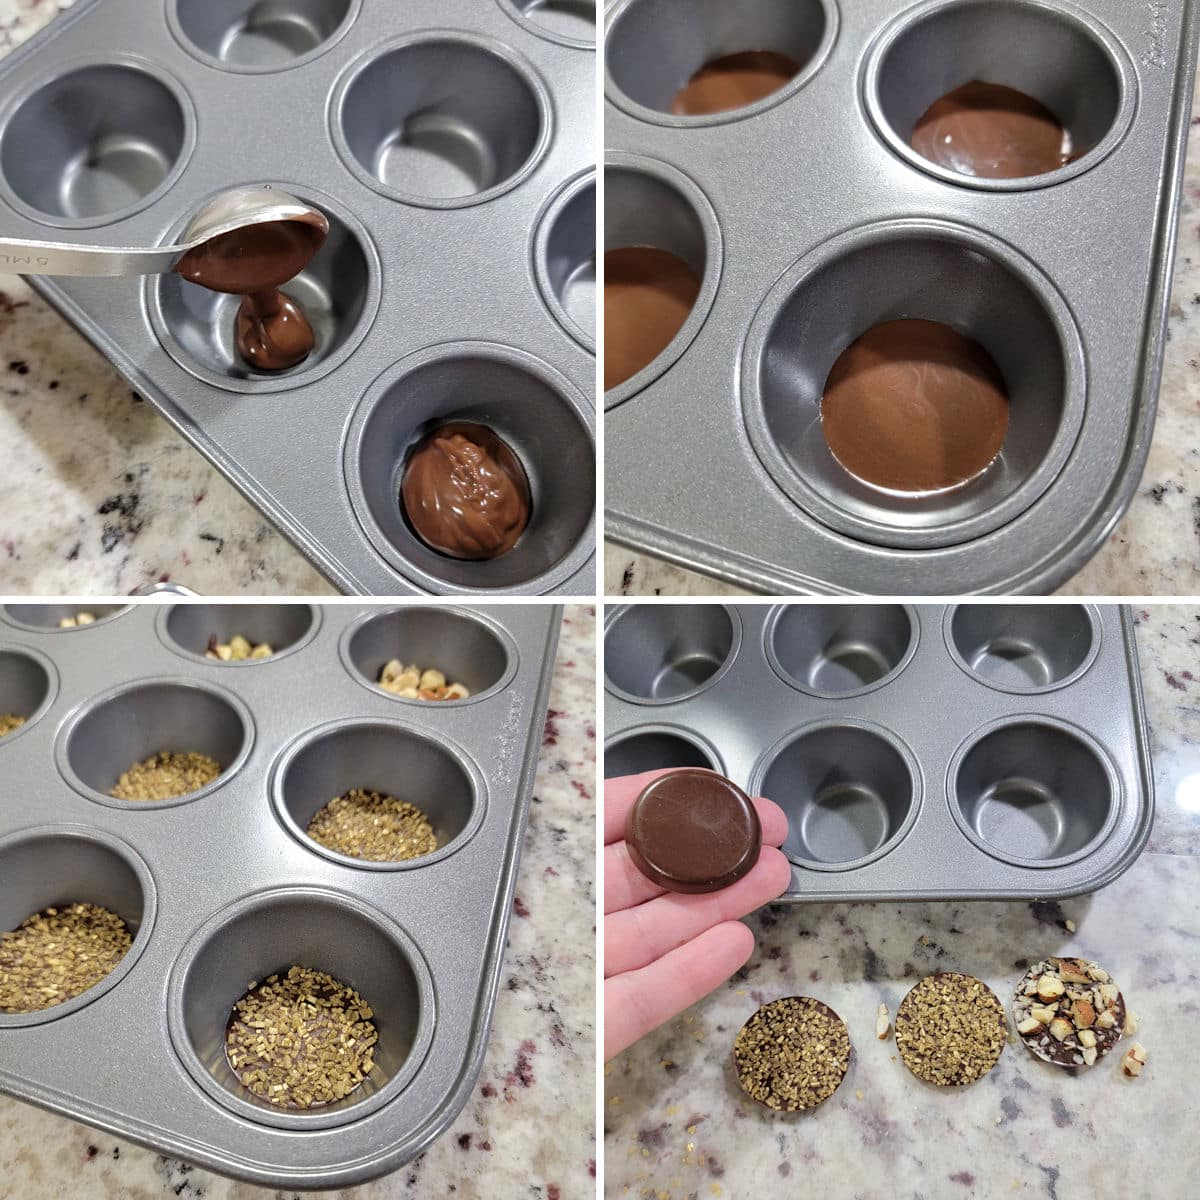 Making hanukkah gelt in a mini muffin pan with melted chocolate.